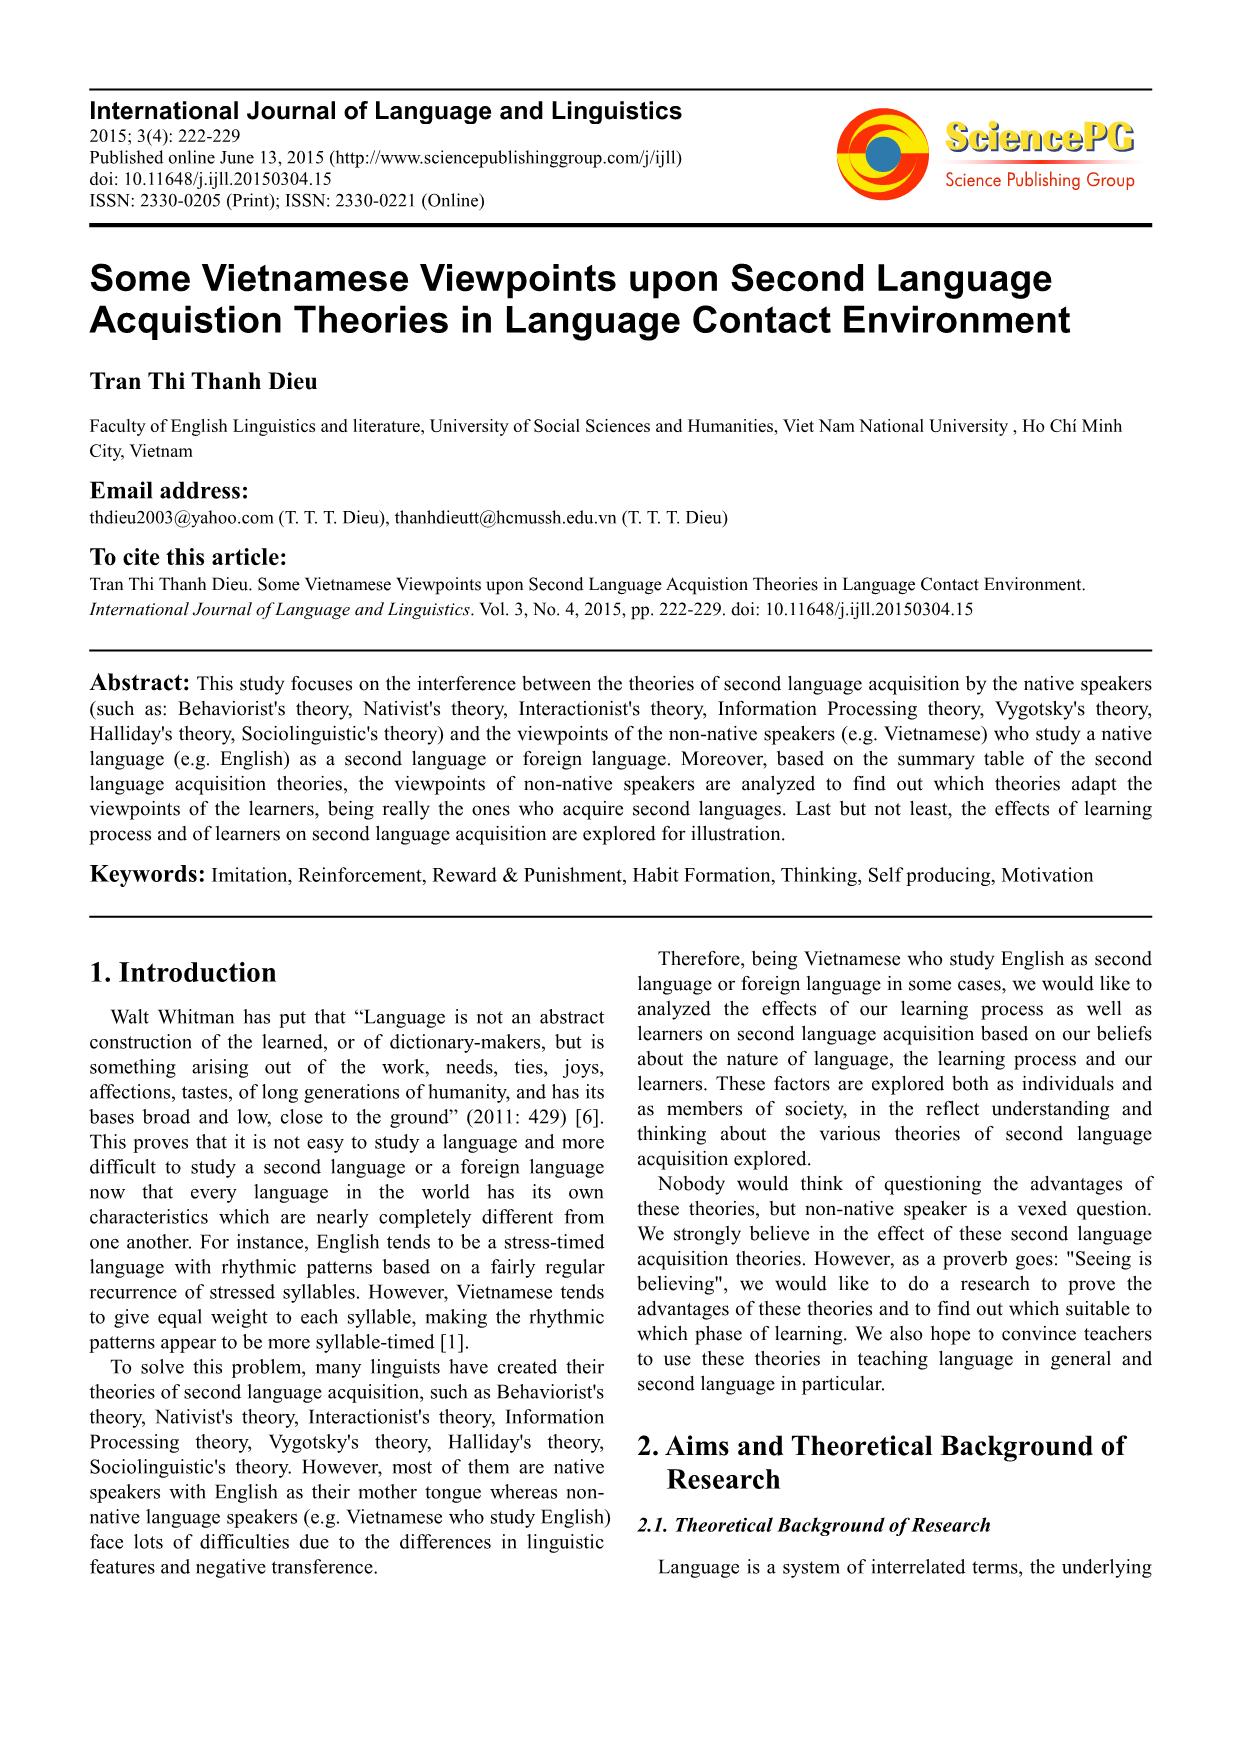 Some Vietnamese Viewpoints upon Second Language Acquistion Theories in Language Contact Environment trang 1